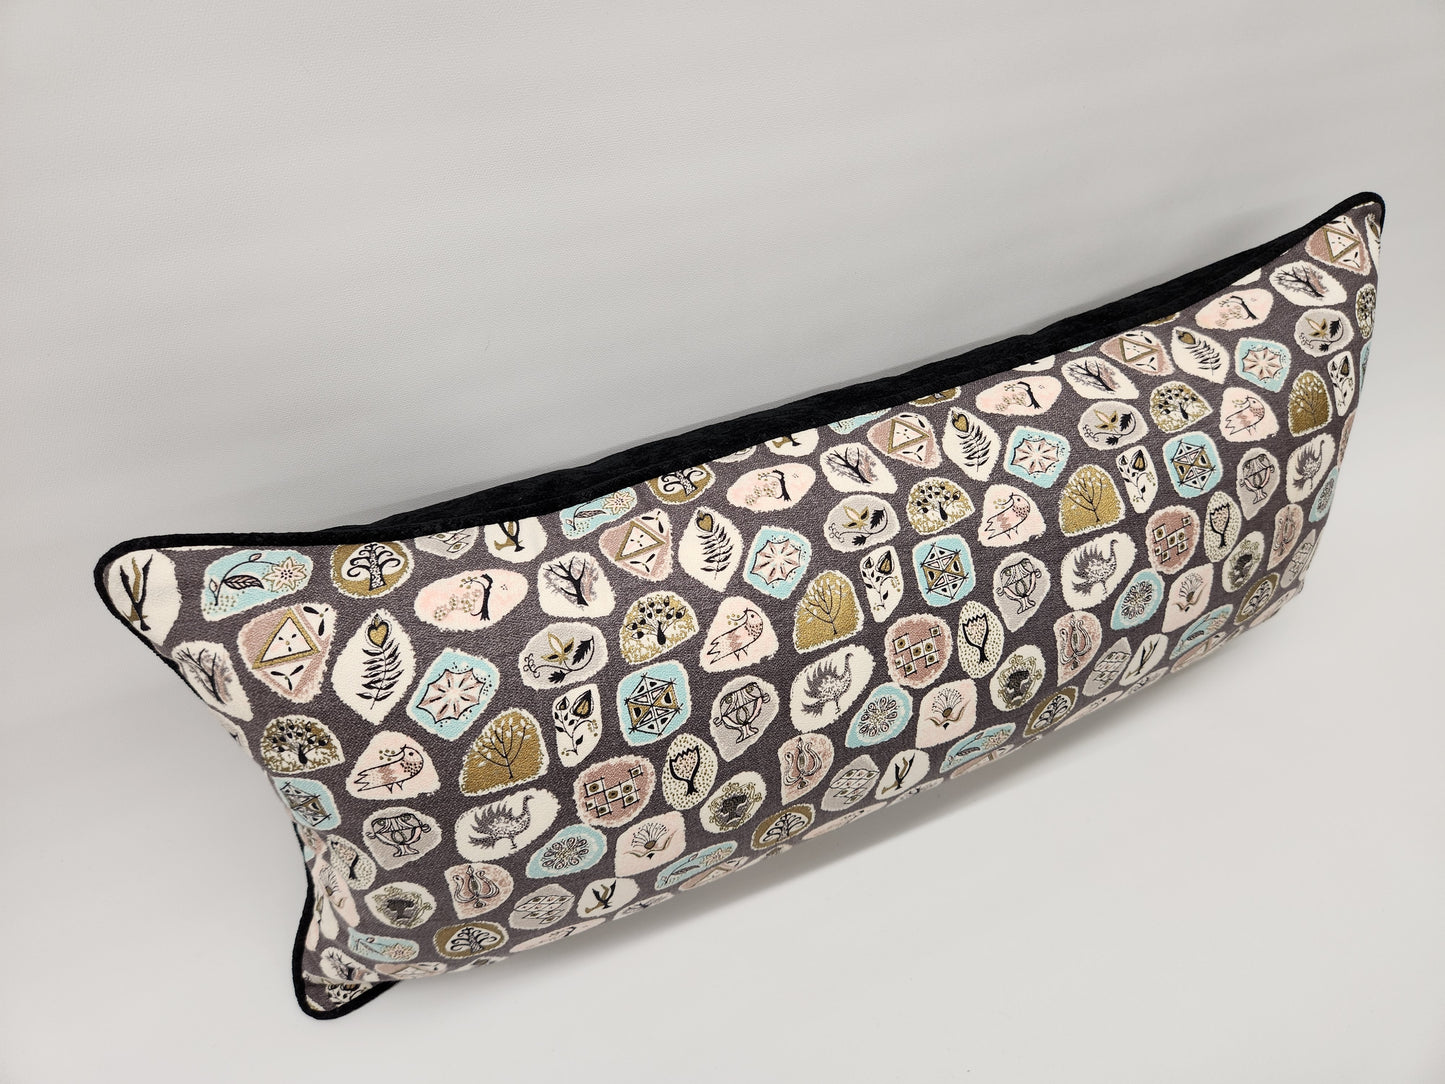 Whimsical 1950s Vintage Barkcloth 13x28 Lumbar Pillow: Teal, Pink, Metallic Gold, Black, Grey, Mid-Century-Modern, Only 2 Available